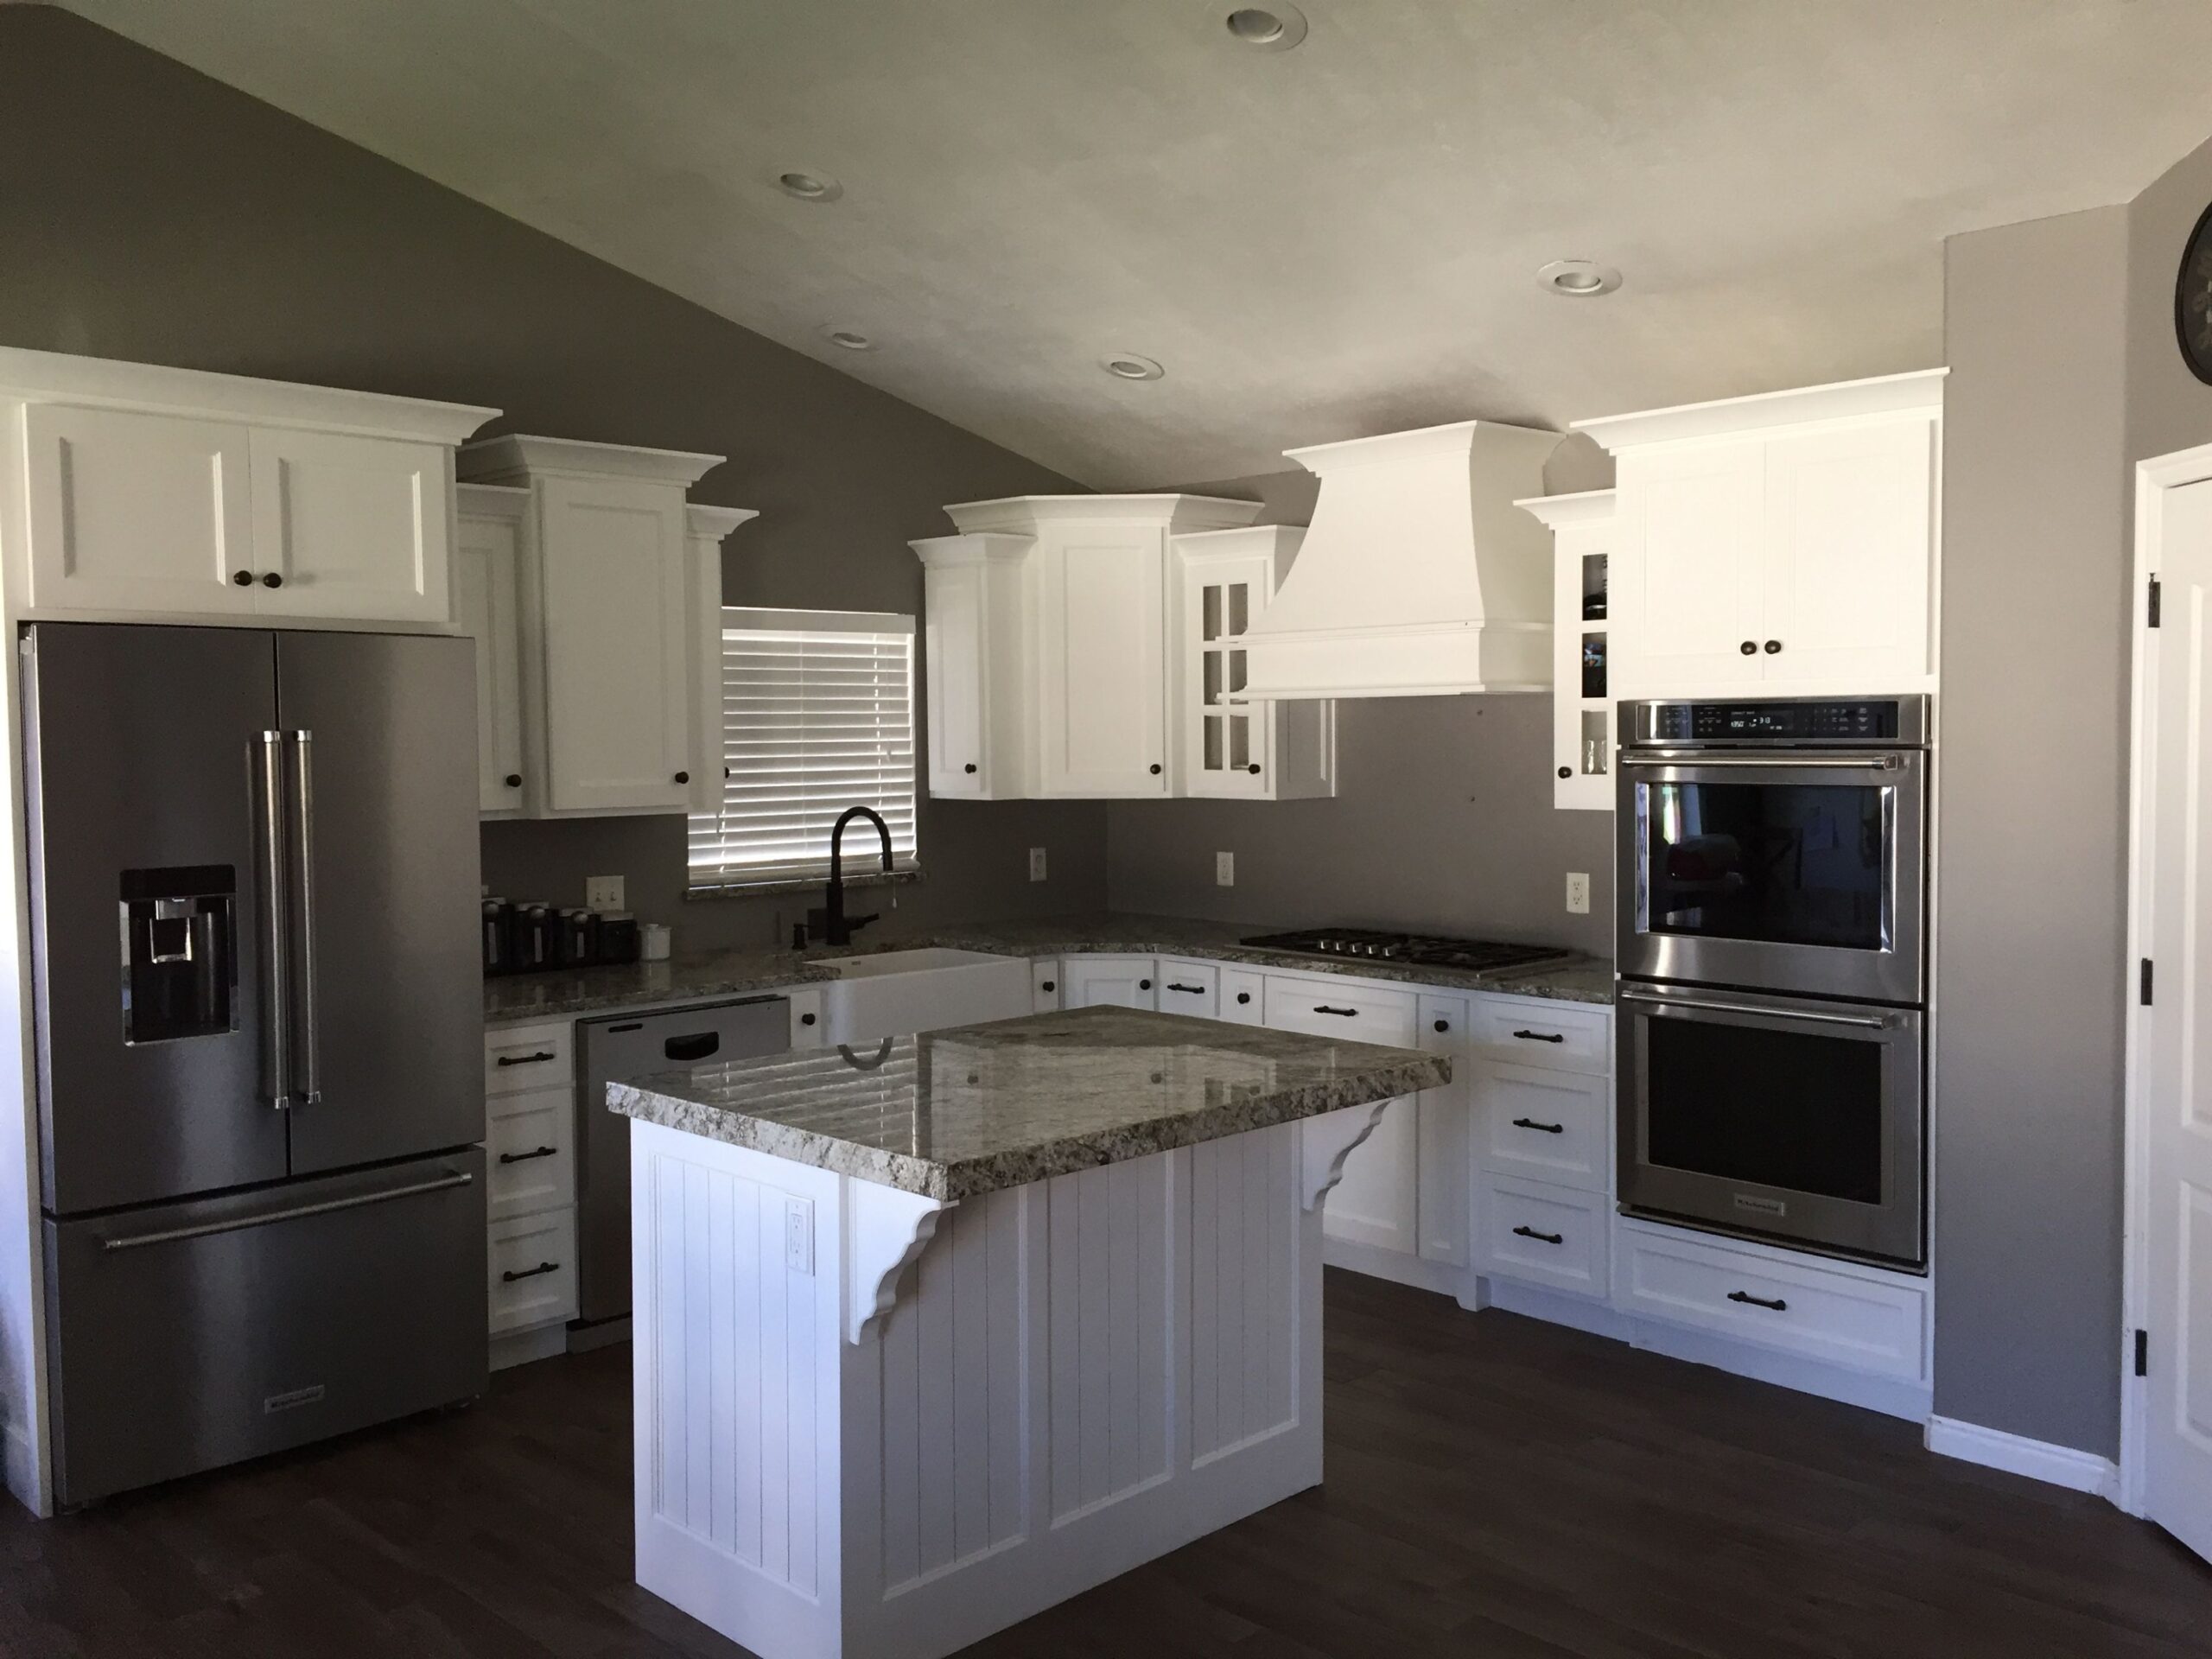 Grey walls with white kitchen cabinets and oil rubbed bronze  - gray kitchen walls with white cabinets